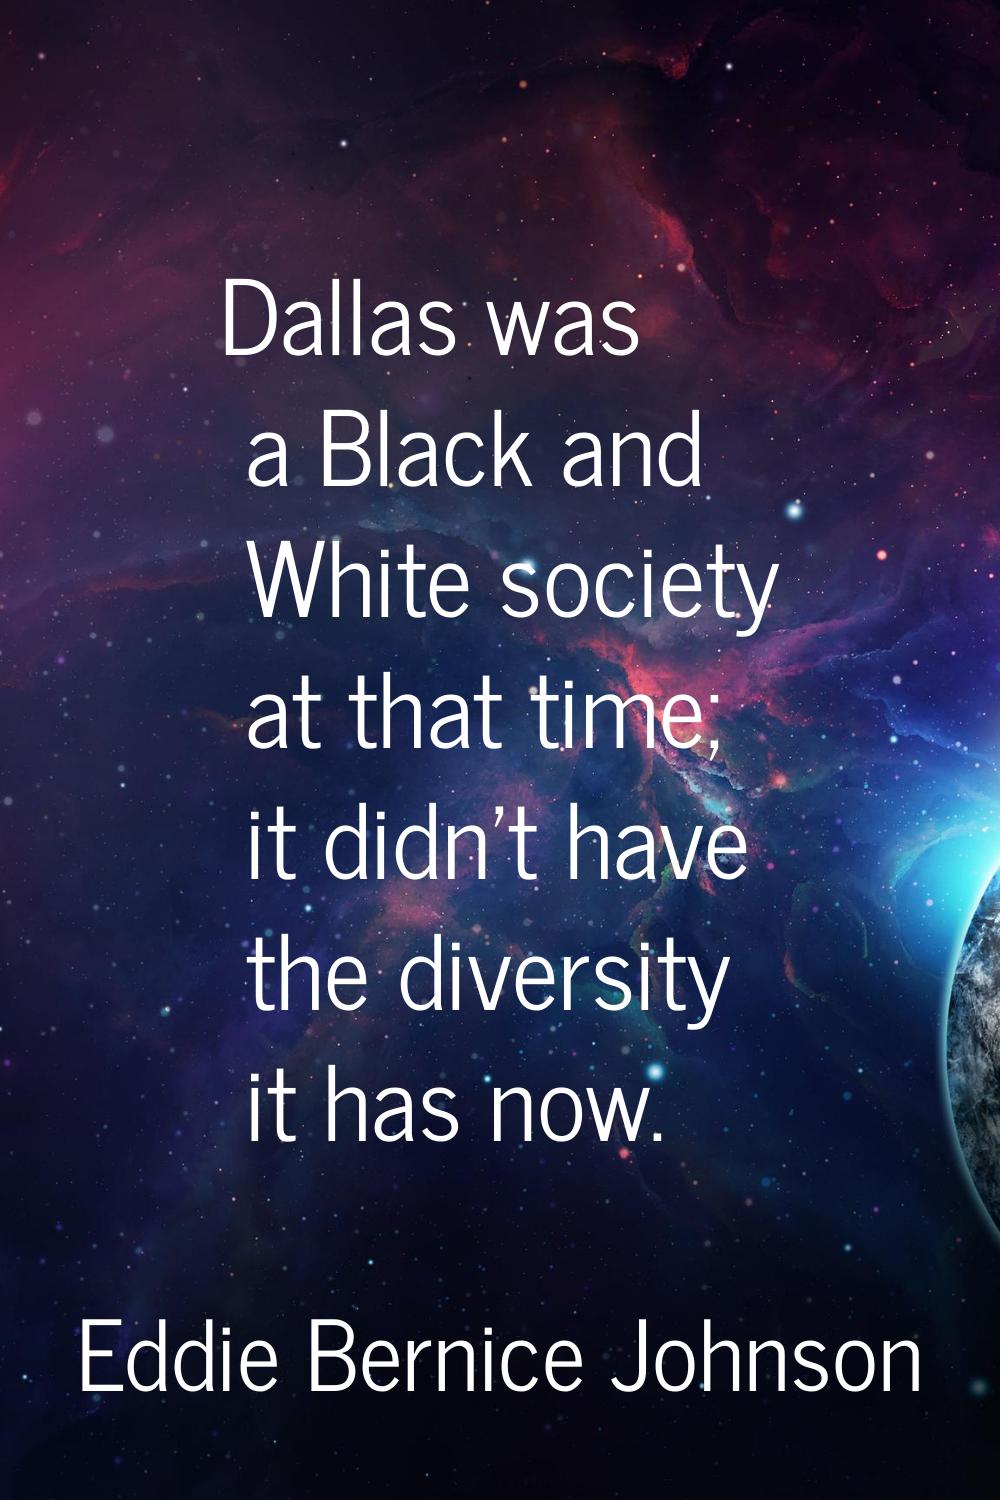 Dallas was a Black and White society at that time; it didn't have the diversity it has now.